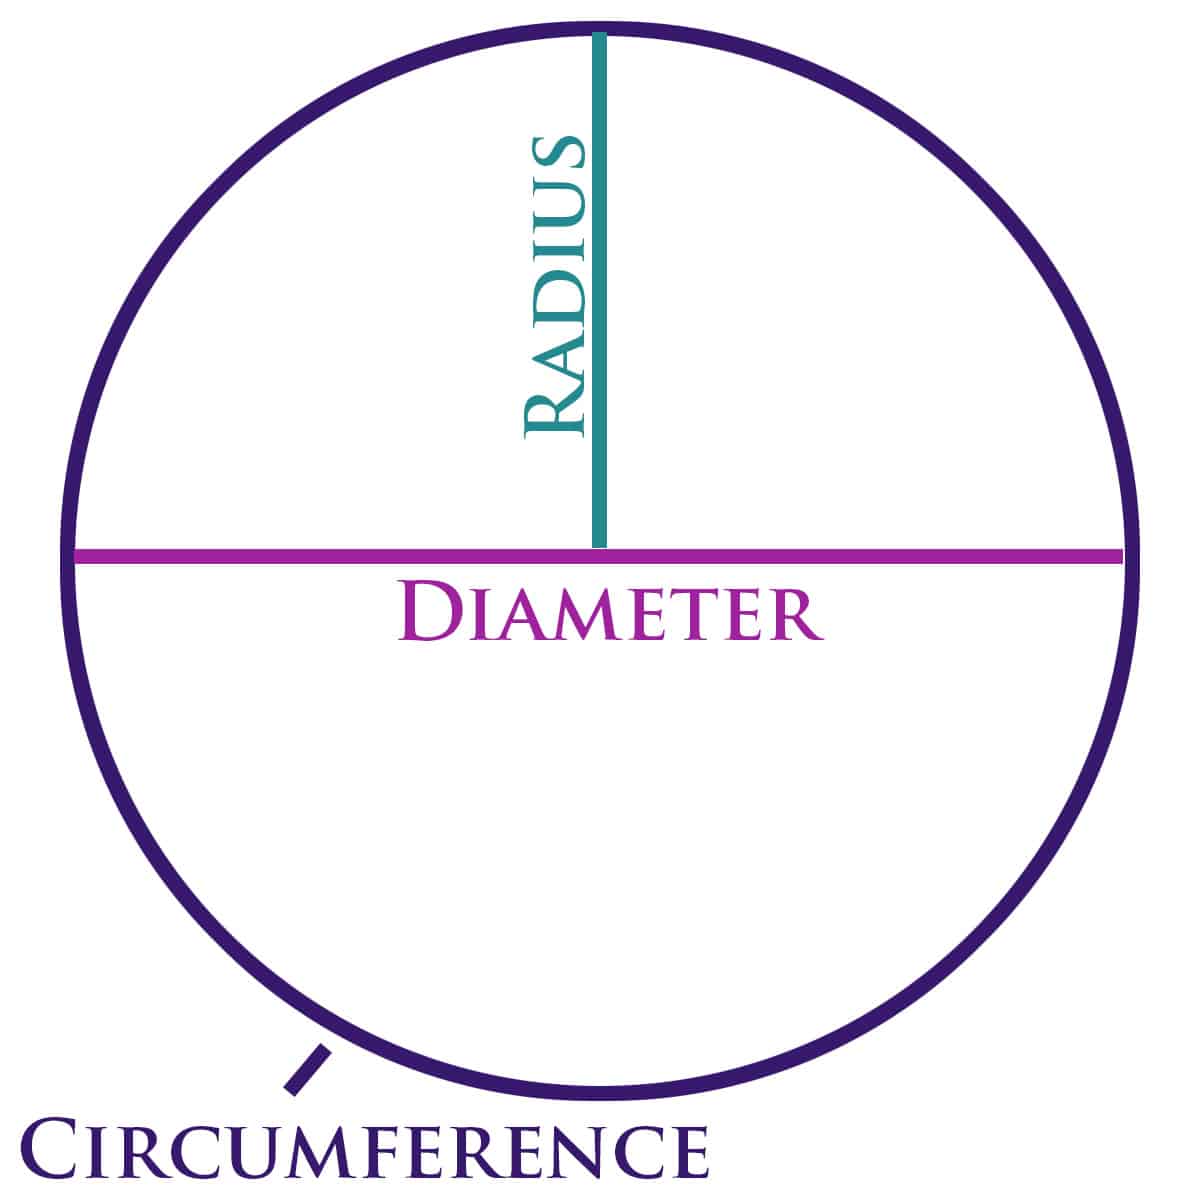 A diagram of a circle, pointing out the circumference, radius, and diameter.